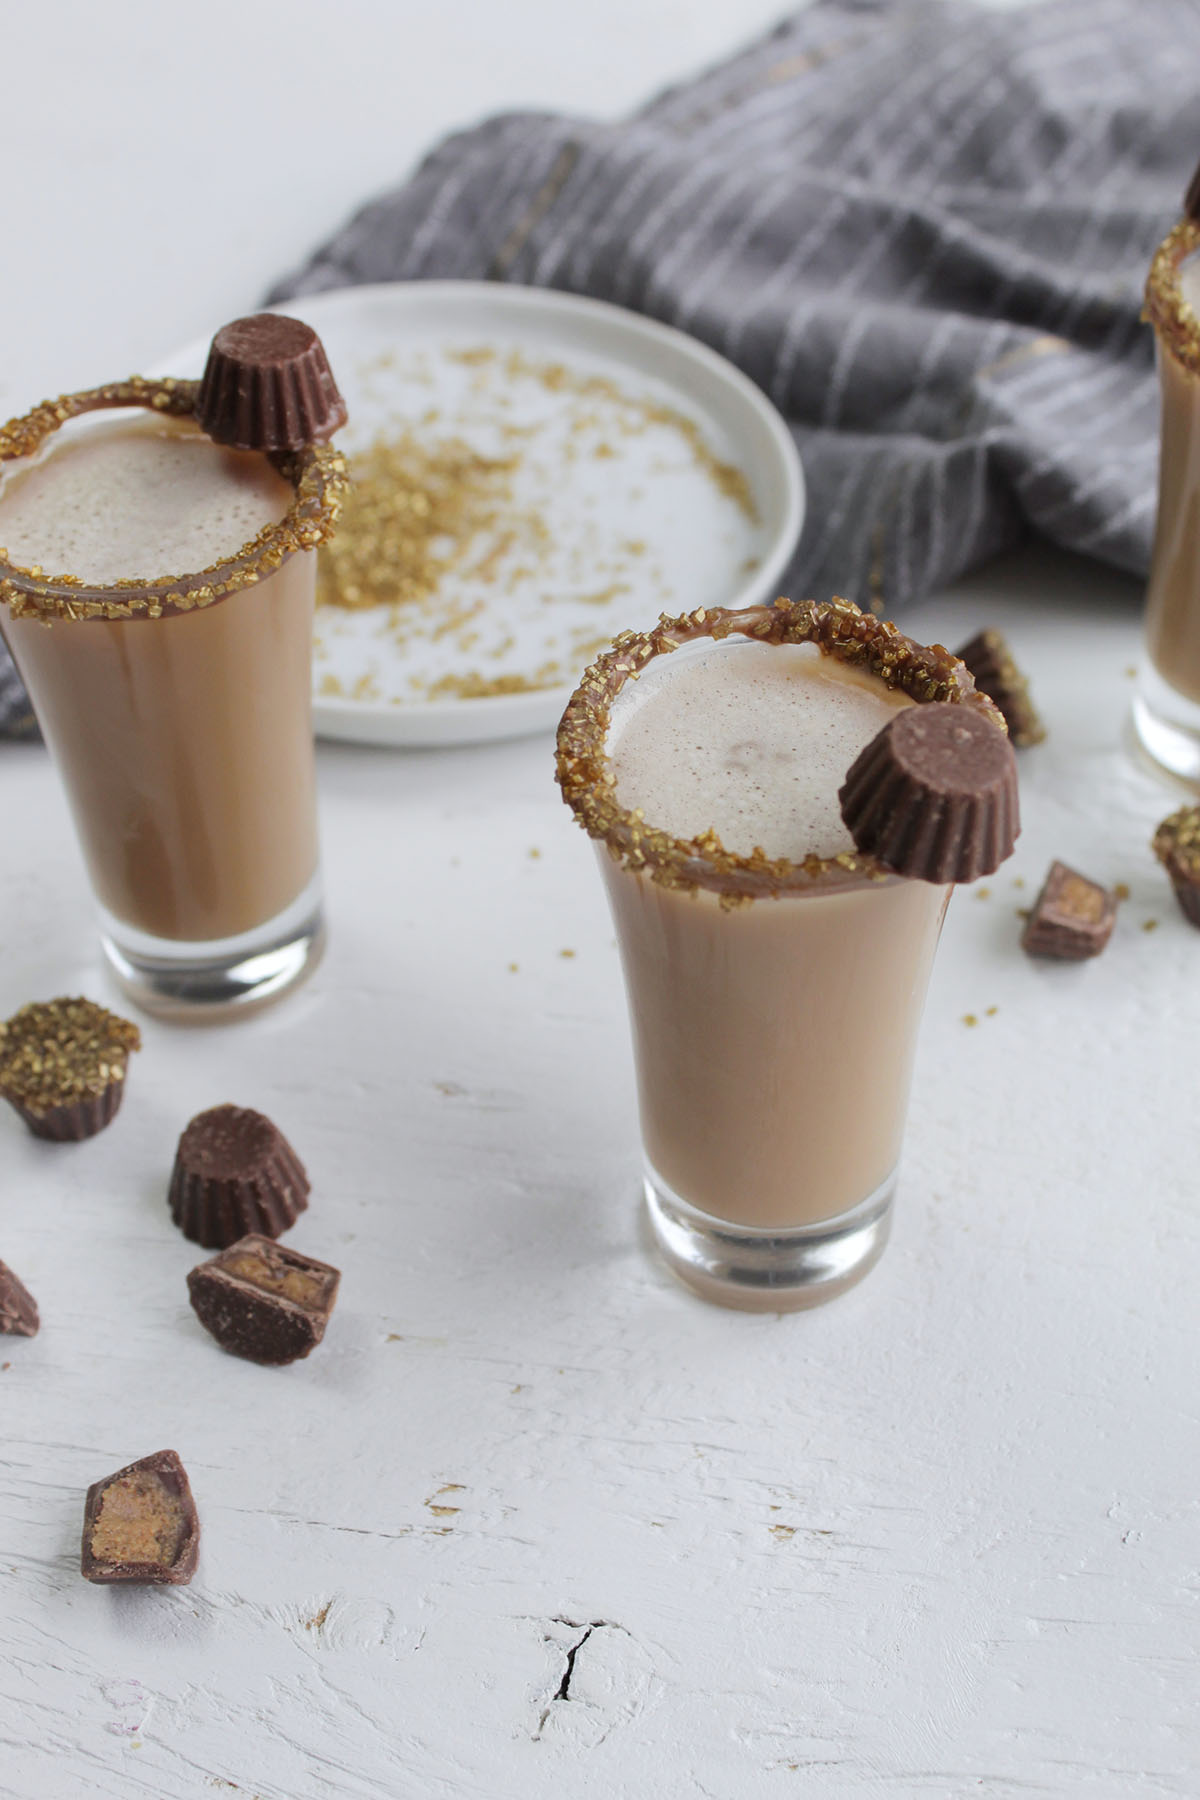 peanut butter whiskey drinks with chocolate rim